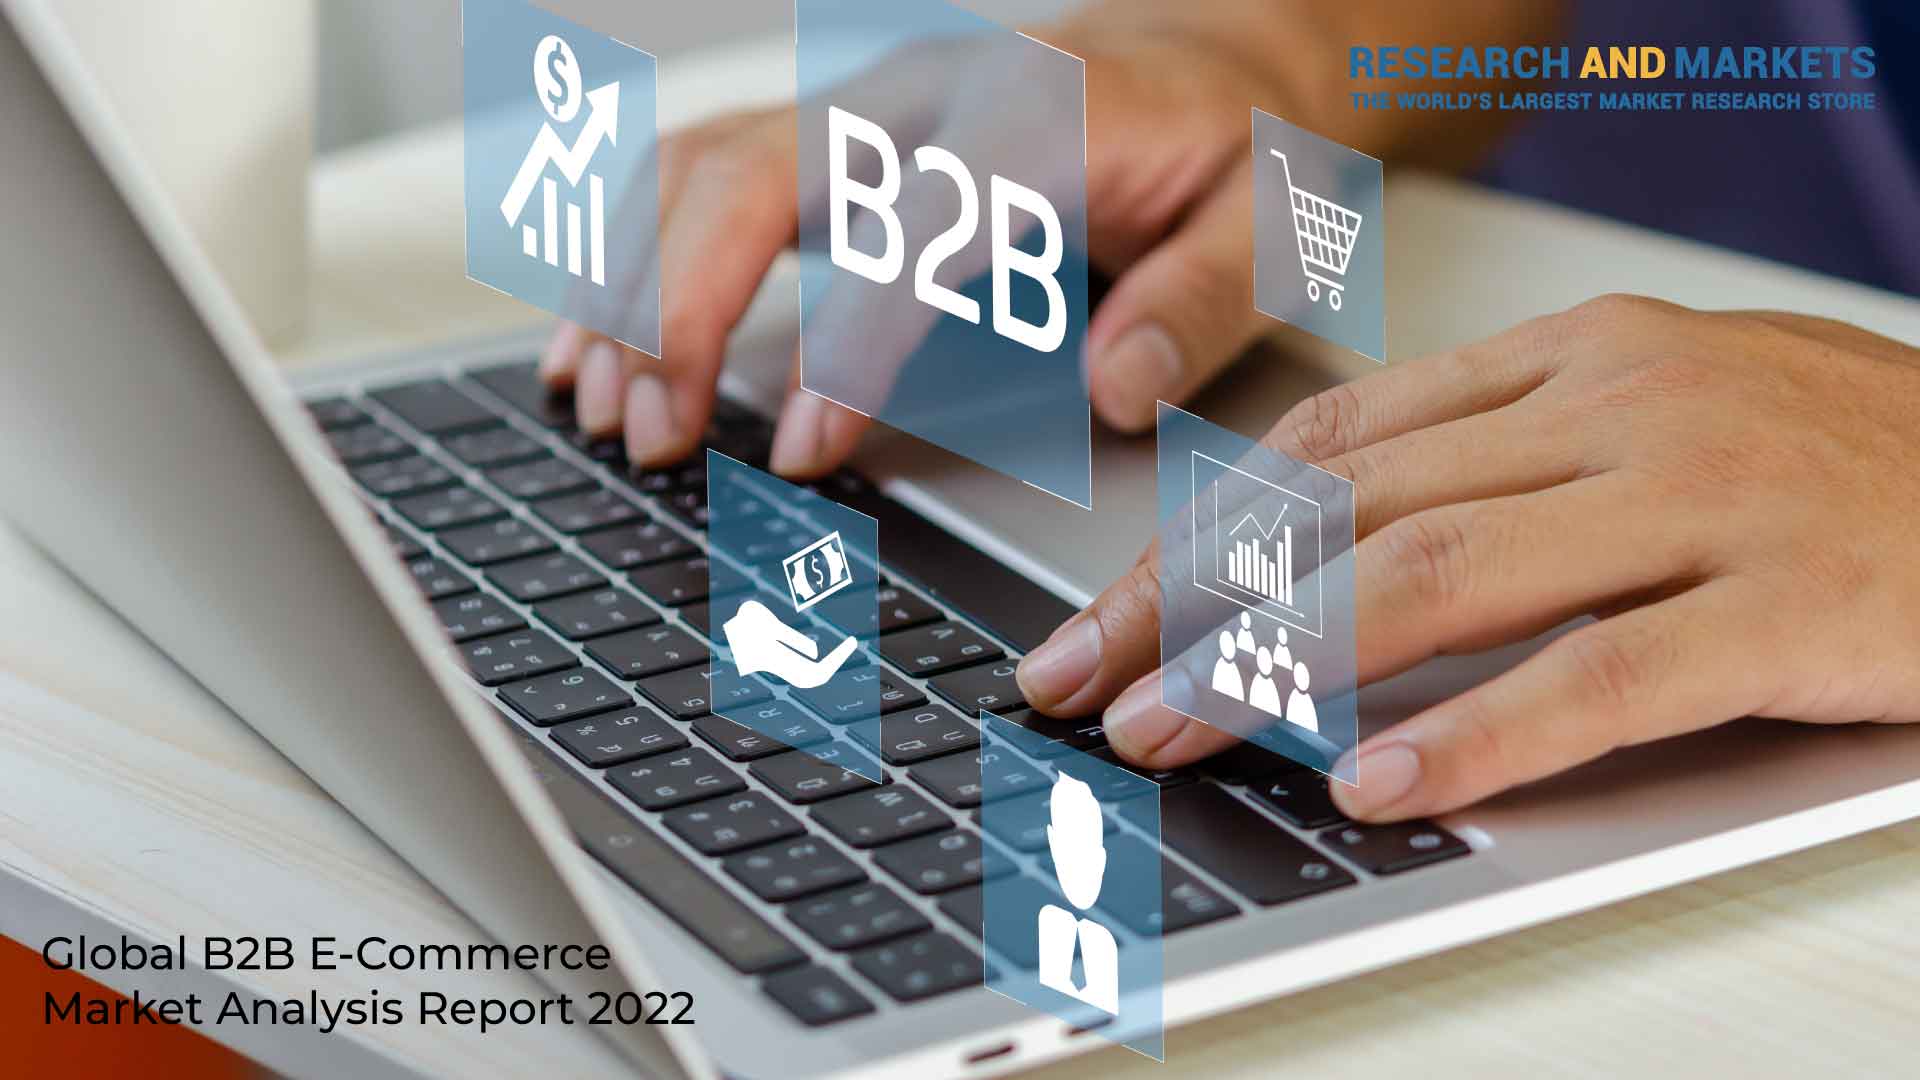 Global B2B E-Commerce Market Analysis Report 2022: Continuous Growth Forecasted Across Regions, With Nearly Half of B2B Buyers Shifting from Traditional to Online Channels of Purchase